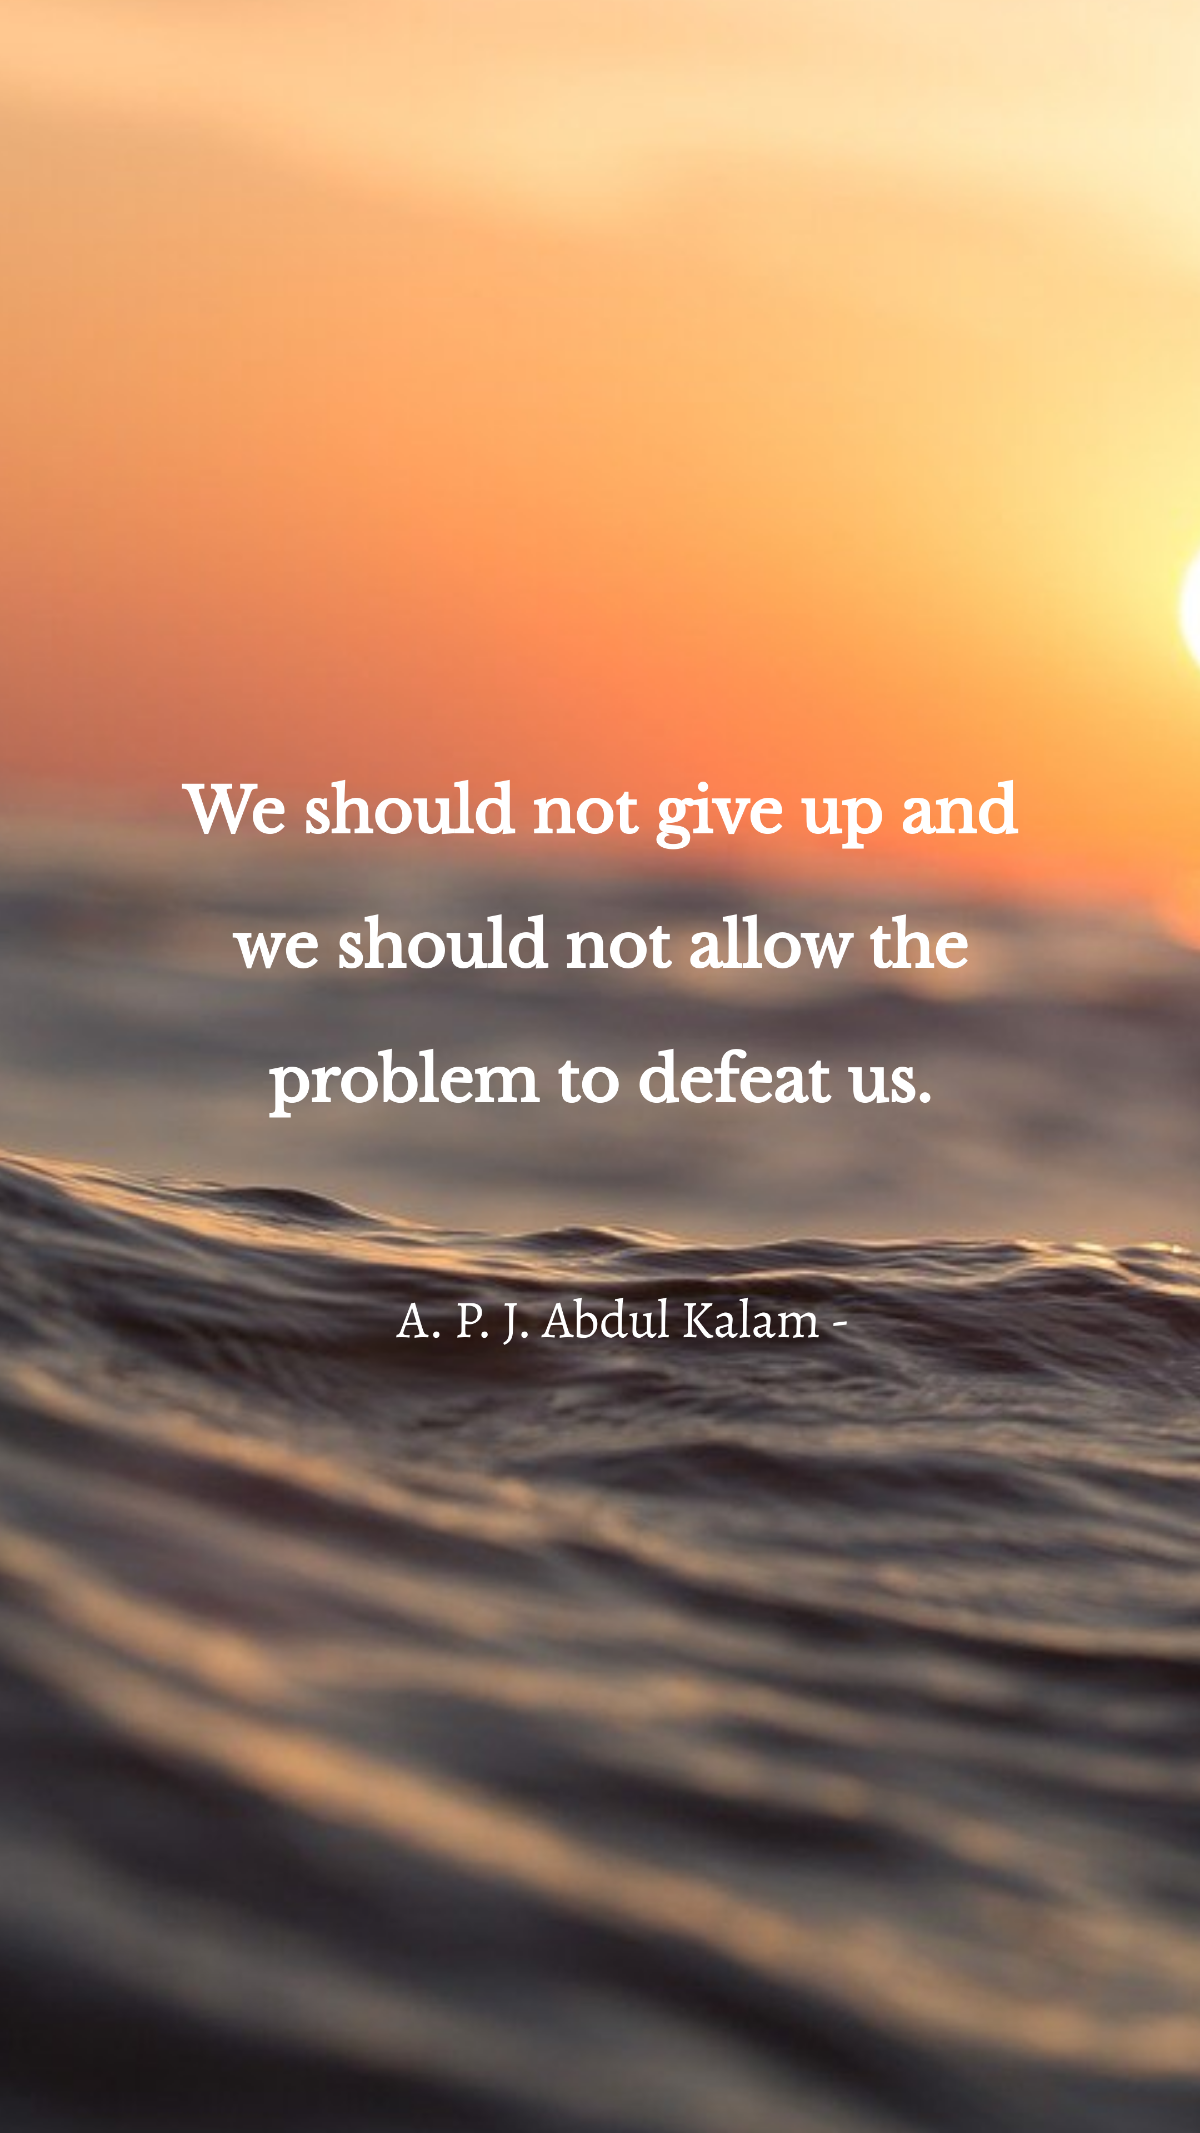 A. P. J. Abdul Kalam - We should not give up and we should not allow the problem to defeat us.